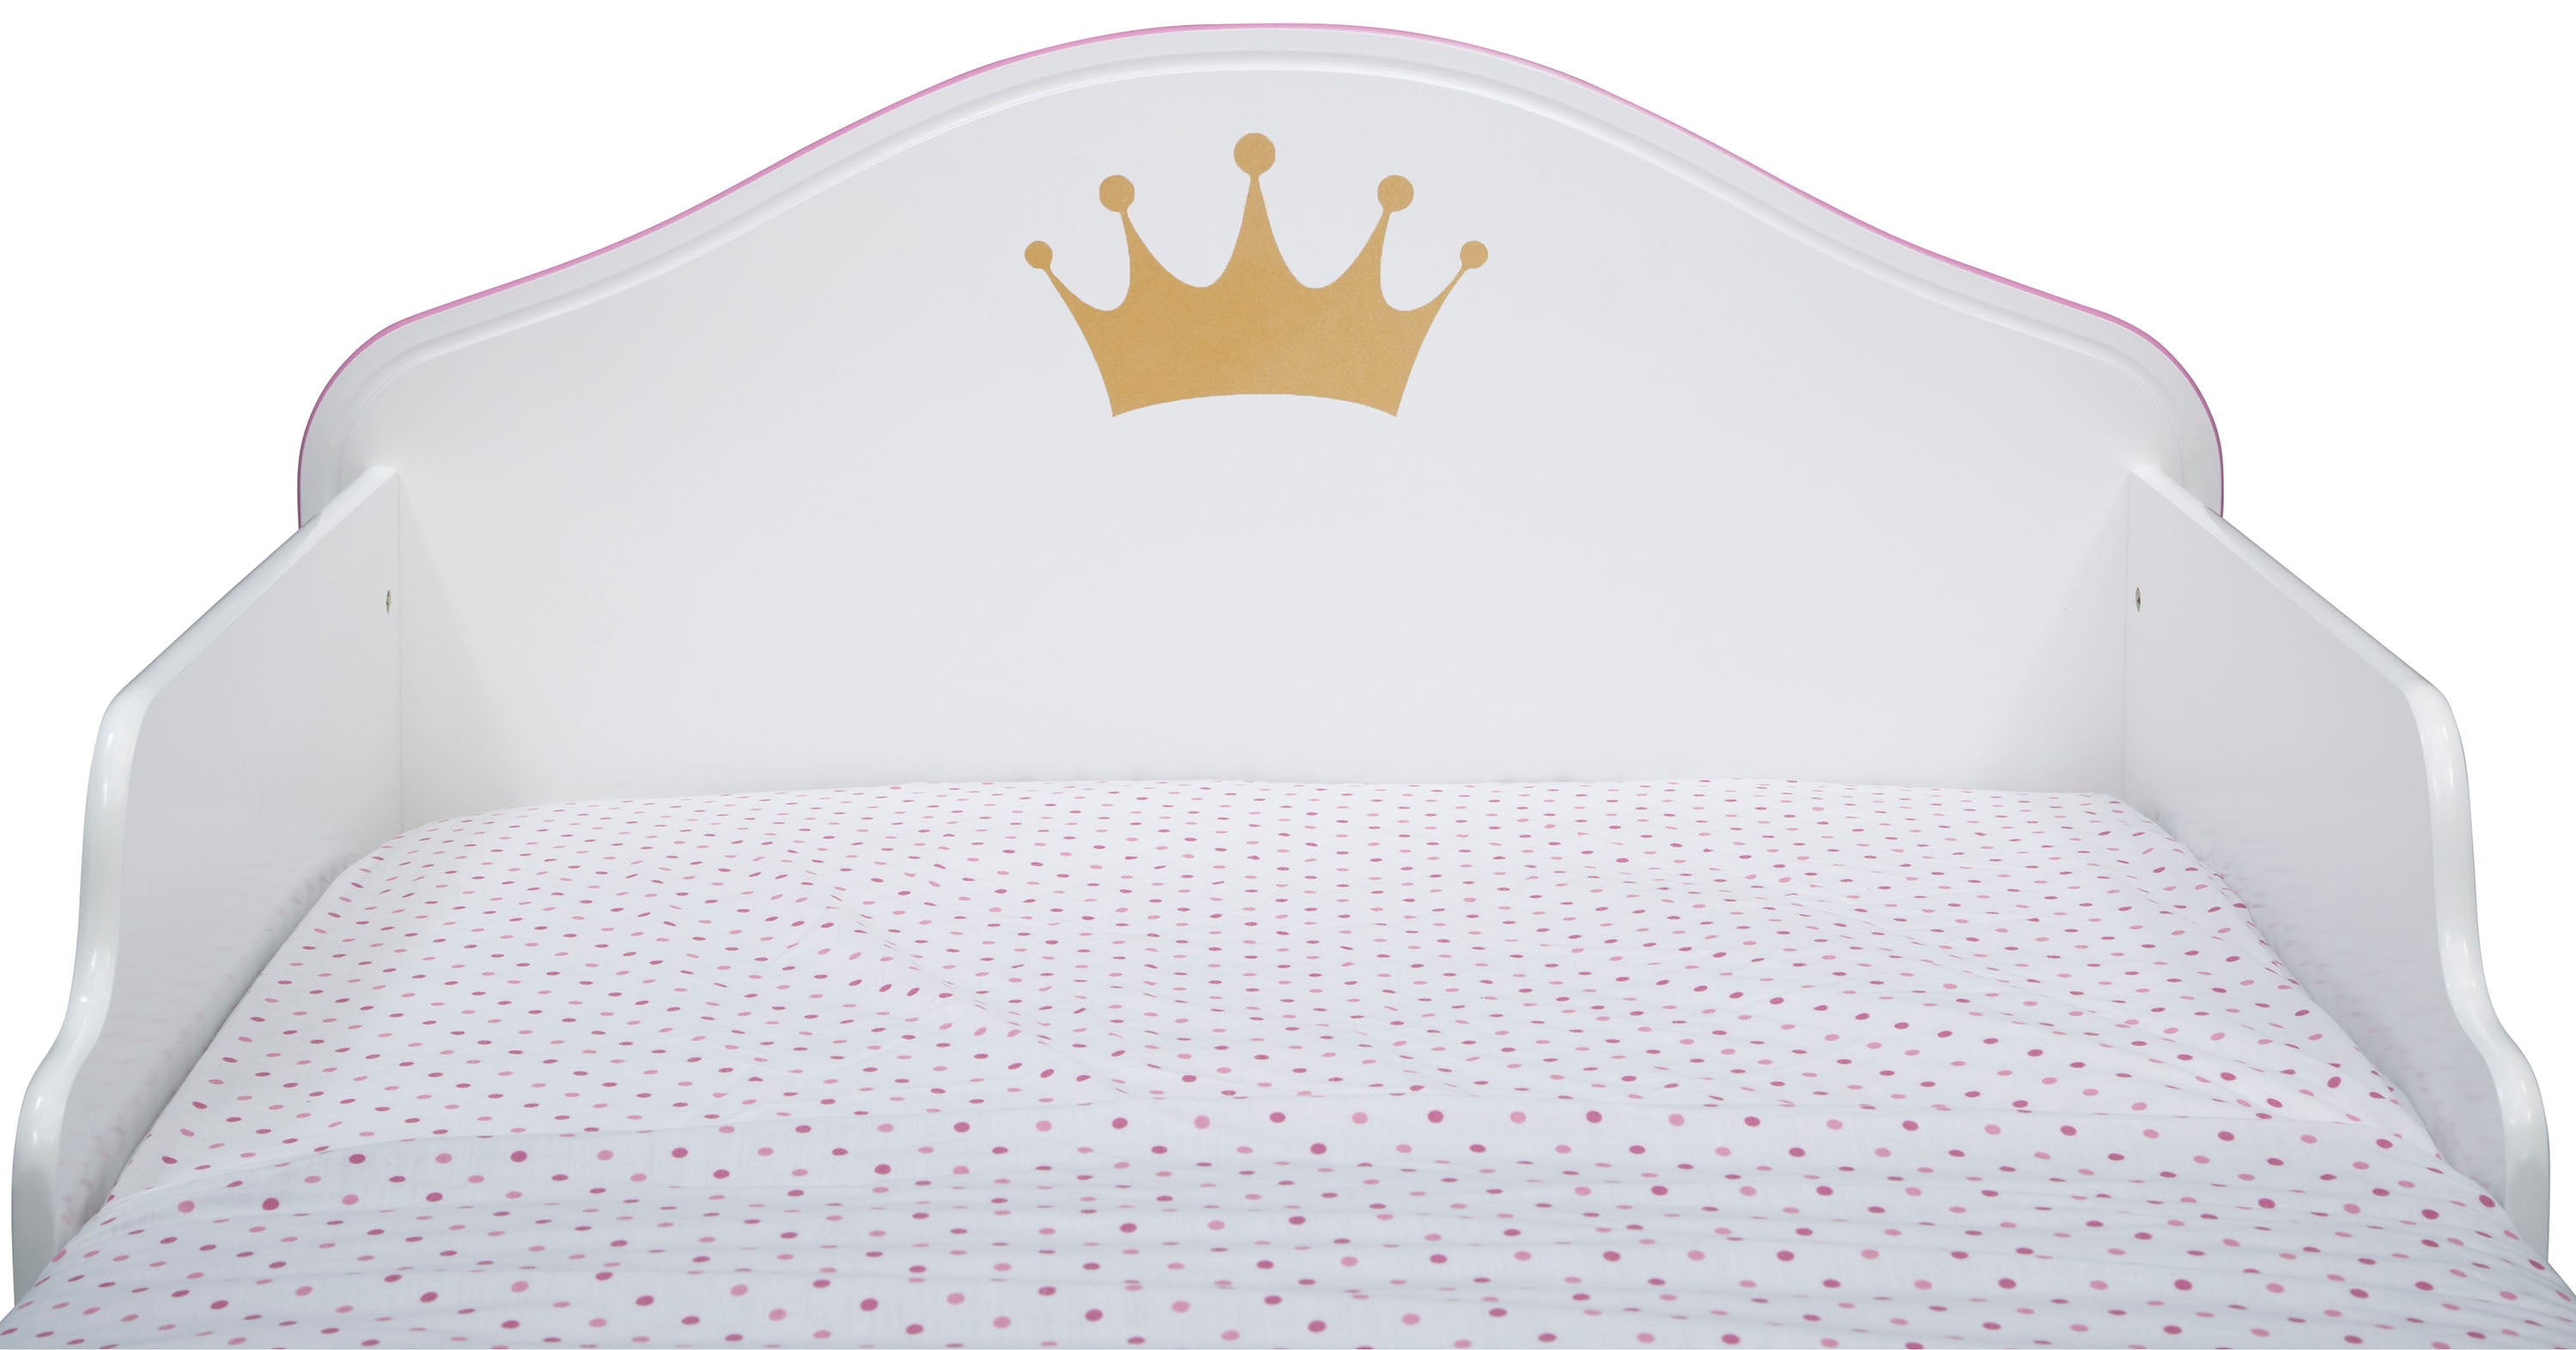 Delta Children Princess Crown Wood Toddler Bed, White/Pink-toddler girl bed-AULEY